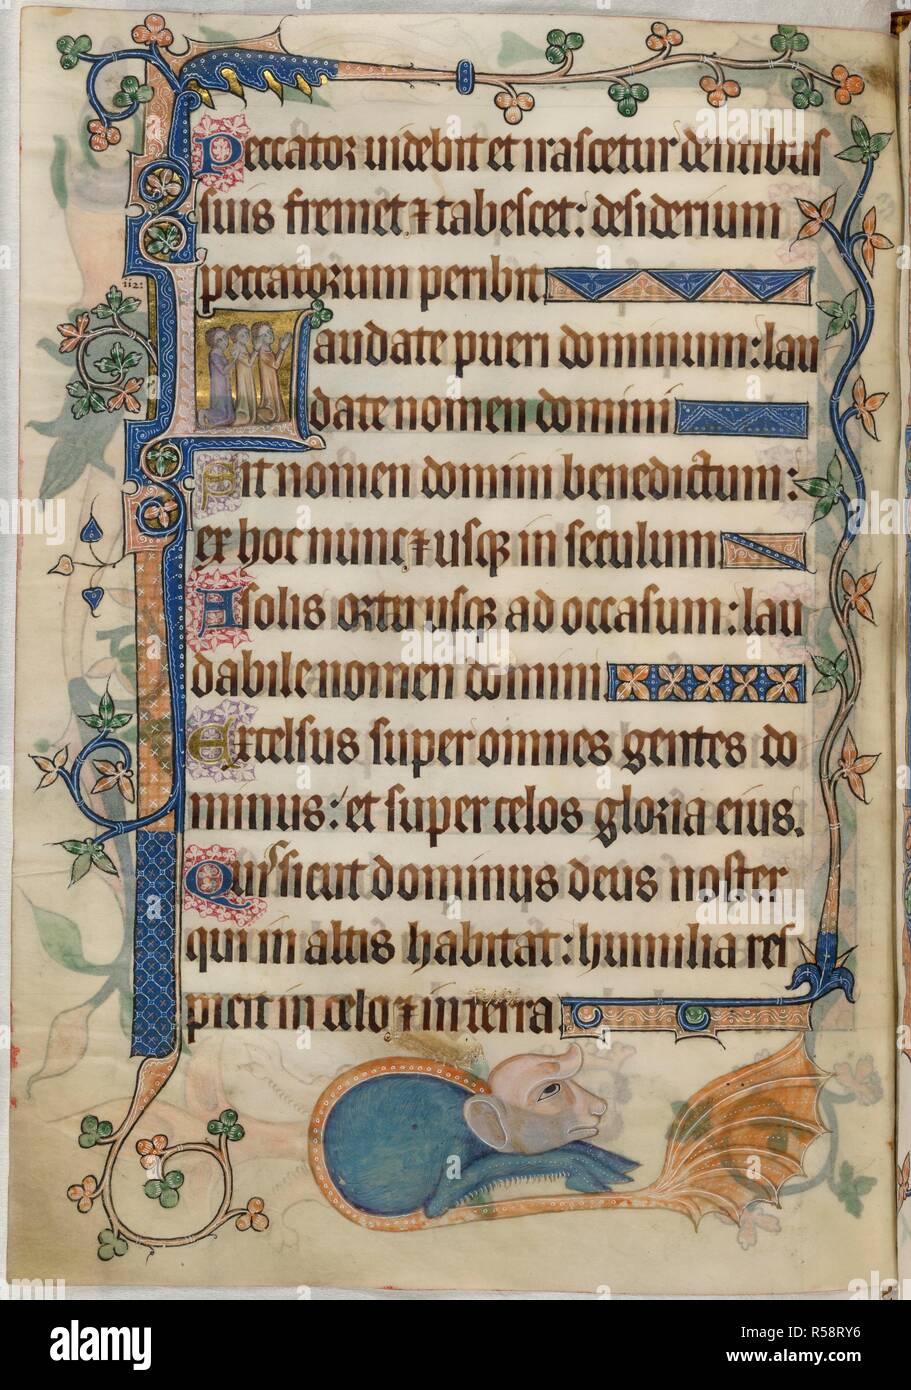 Psalm 112; grotesque. Luttrell Psalter. England [East Anglia]; circa 1325-1335. [Whole folio] End of Psalm 111. Psalm 112 beginning with initial 'L', three boys kneeling. Border decoration; in lower margin, a figure with a grotesque head and a vermillion webbed tail  Image taken from Luttrell Psalter.  Originally published/produced in England [East Anglia]; circa 1325-1335. . Source: Add. 42130, f.205v. Language: Latin. Stock Photo